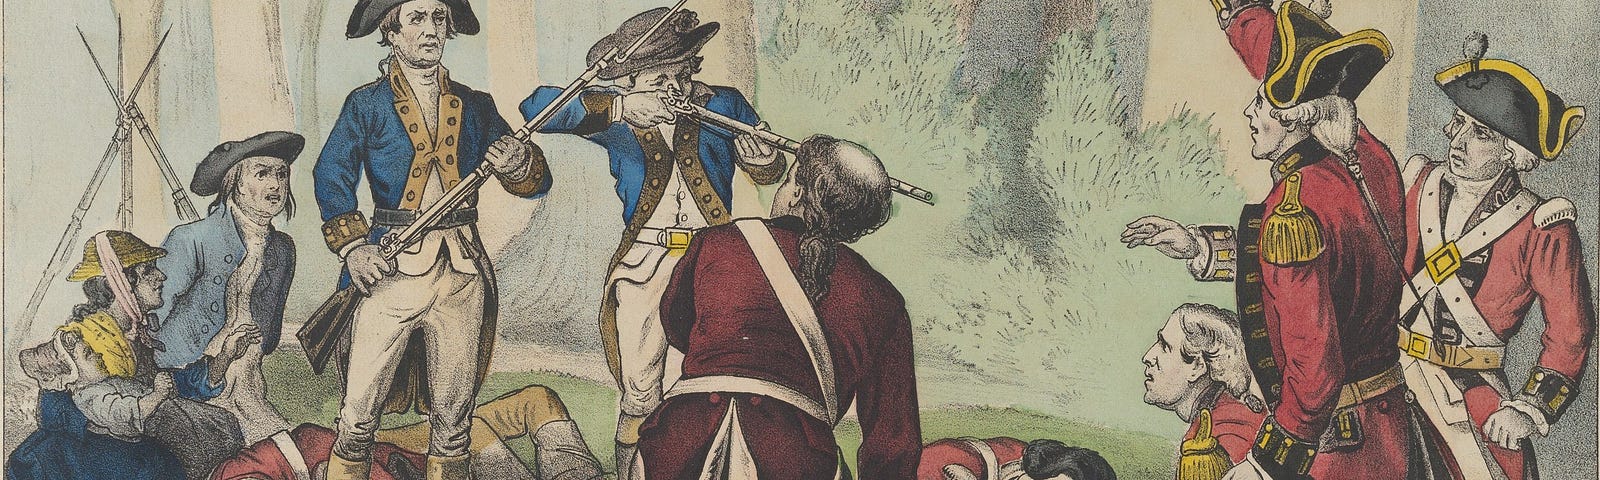 Marion’s Brigade rescuing American prisoners from a British guard, 1779.